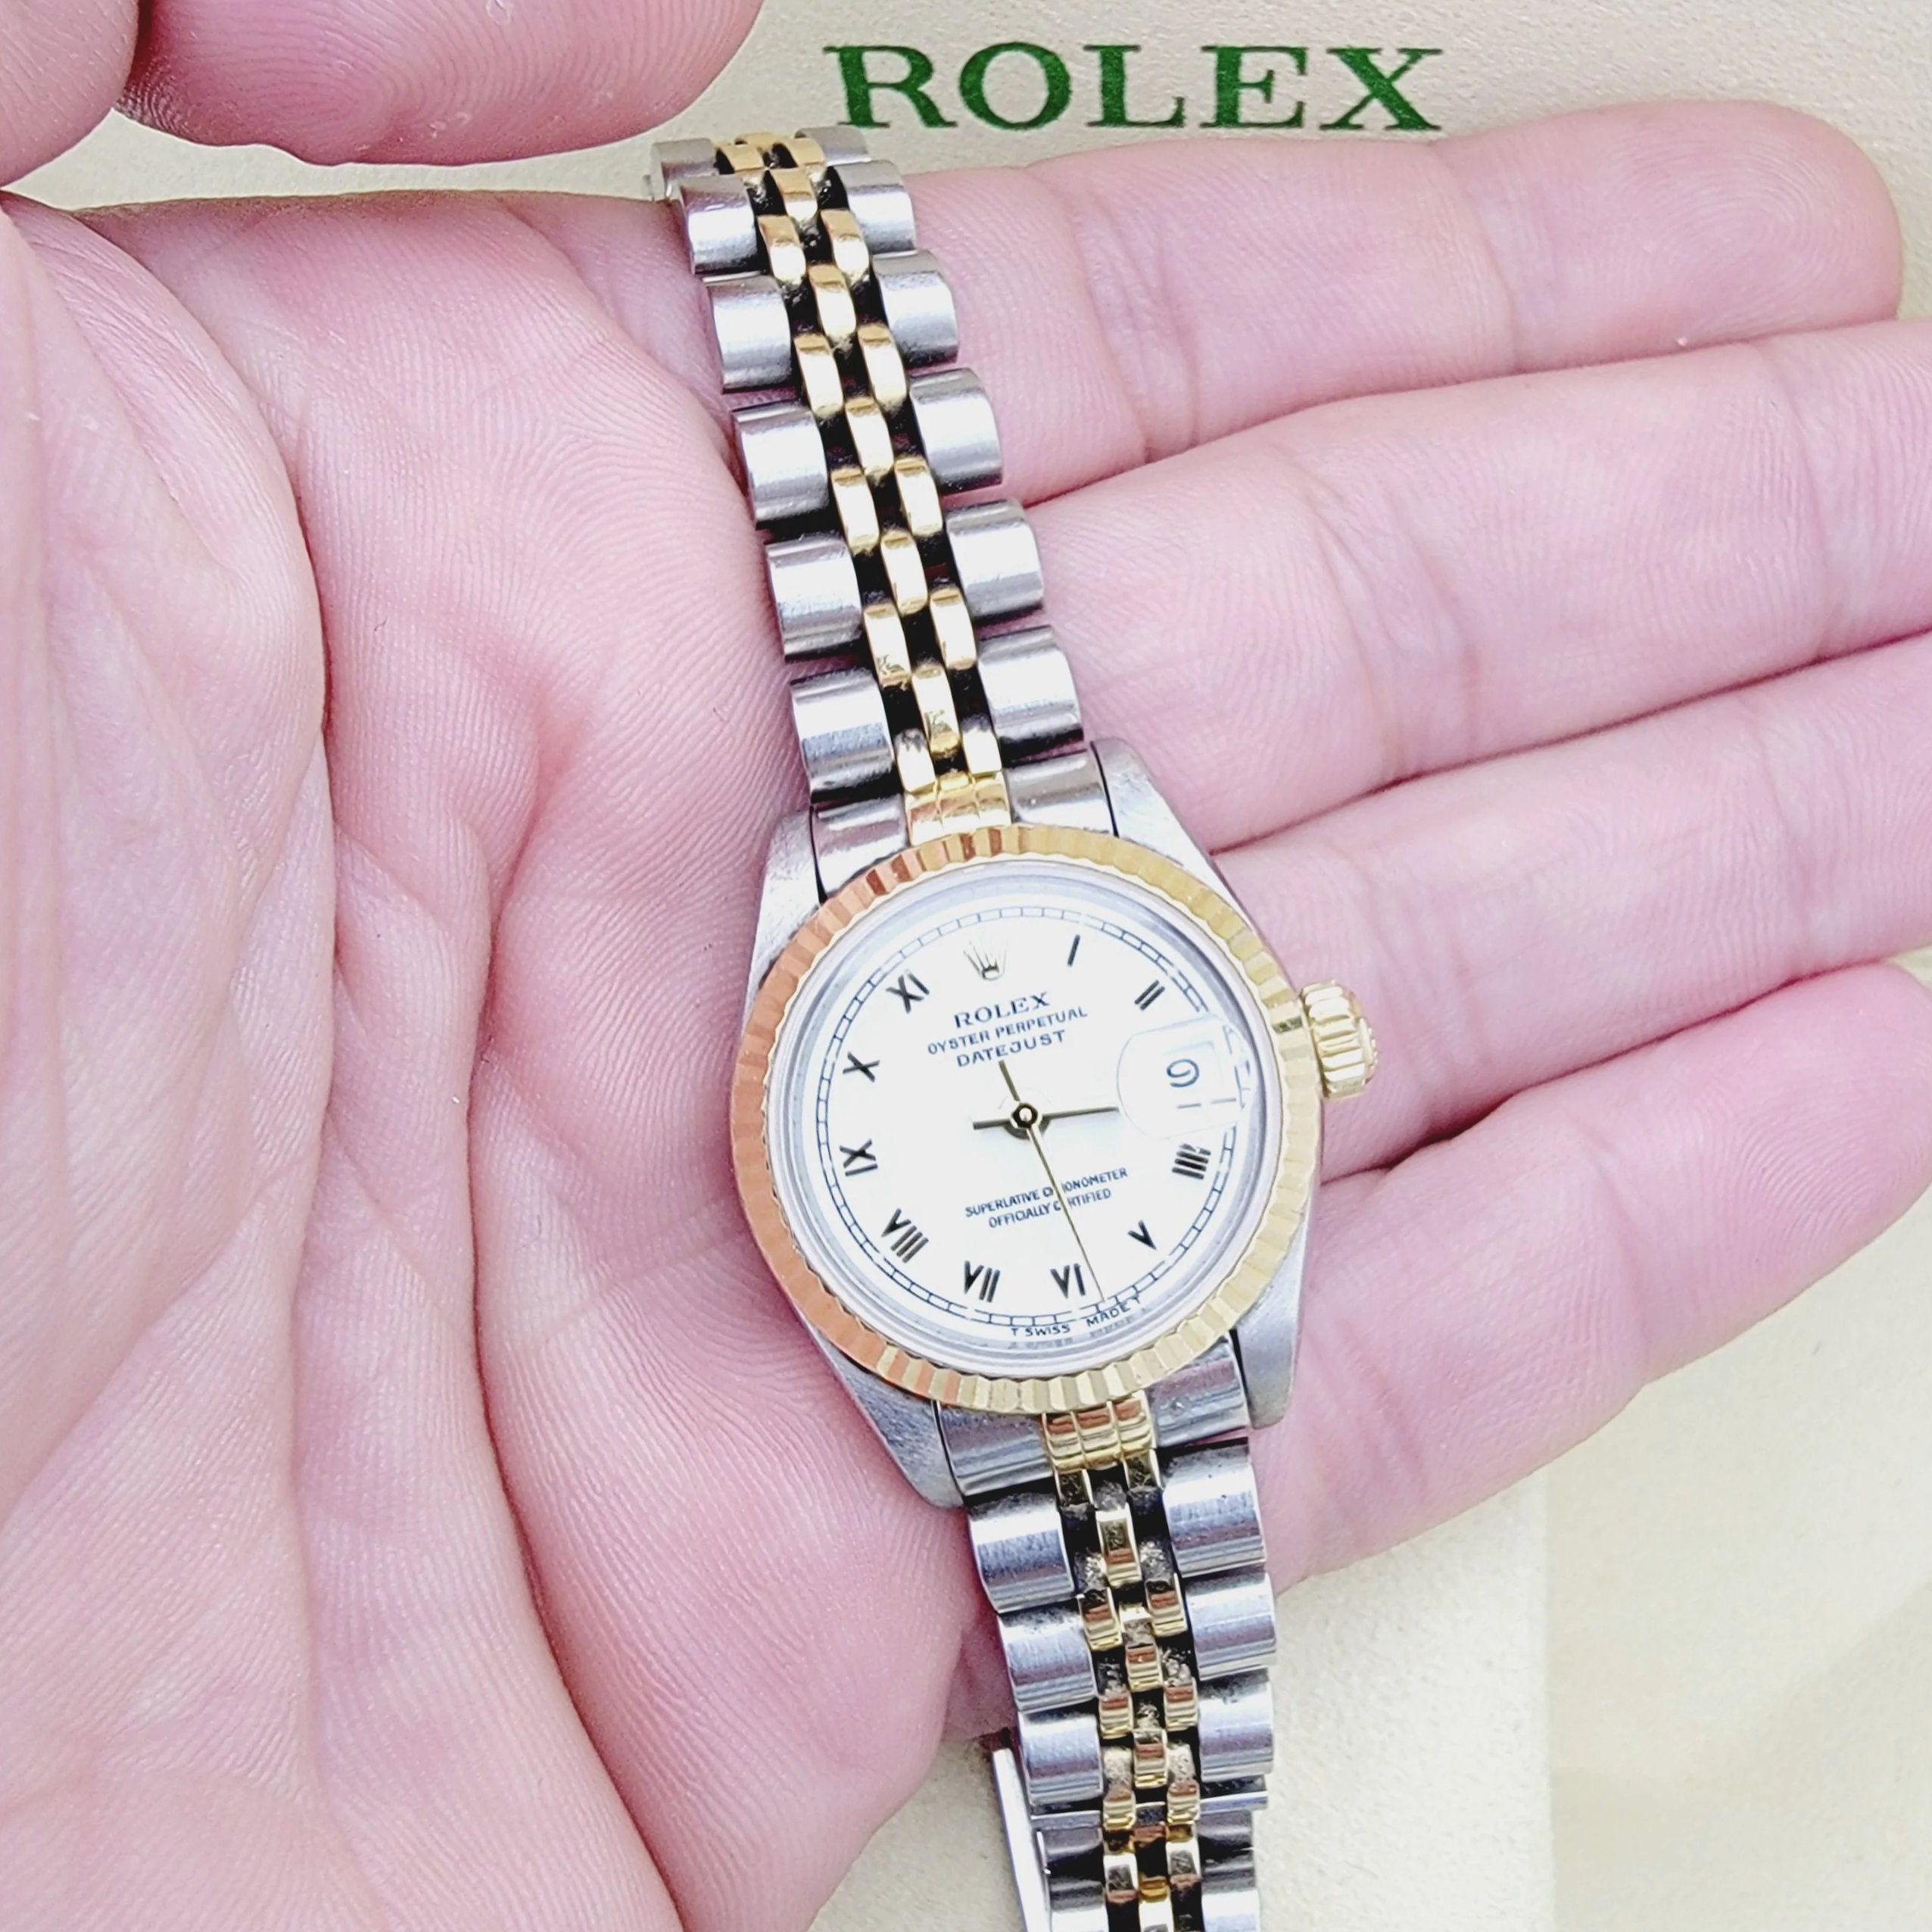 Ladies Rolex 26mm DateJust 18K Yellow Gold / Stainless Steel Two Tone Watch with Roman Numerals White Dial and Fluted Bezel. (Pre-Owned 69173)